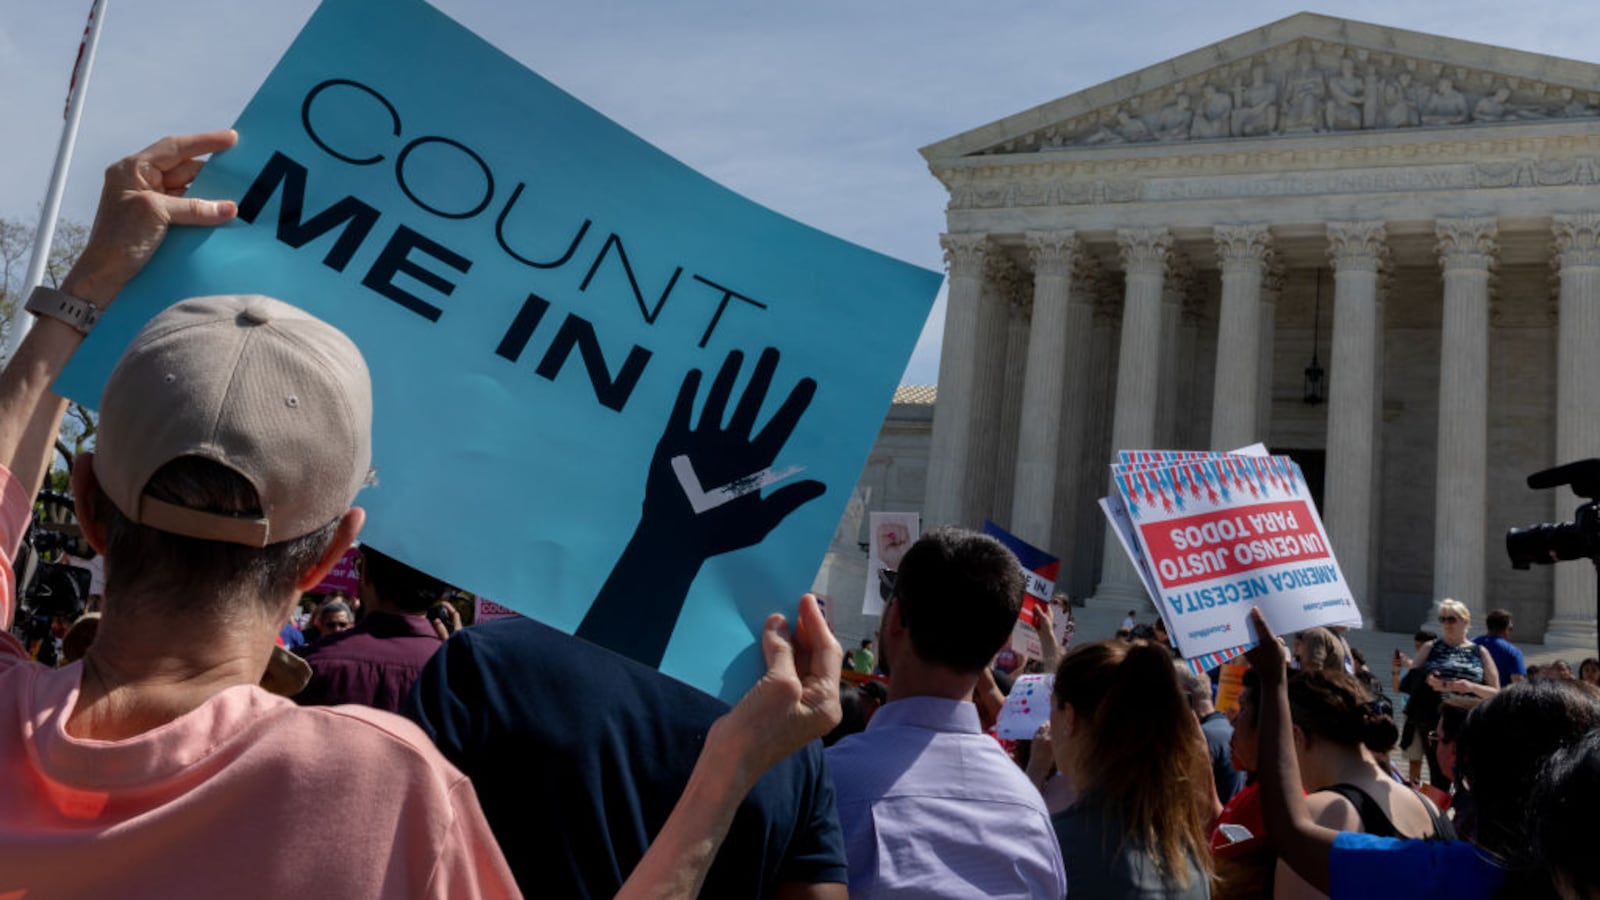 As the Supreme Court justices heard oral arguments over the 2020 census citizenship question, protesters gathered. Tuesday, April 23, 2019, Washington, D.C.  (Photo by Aurora Samperio/NurPhoto via Getty Images)